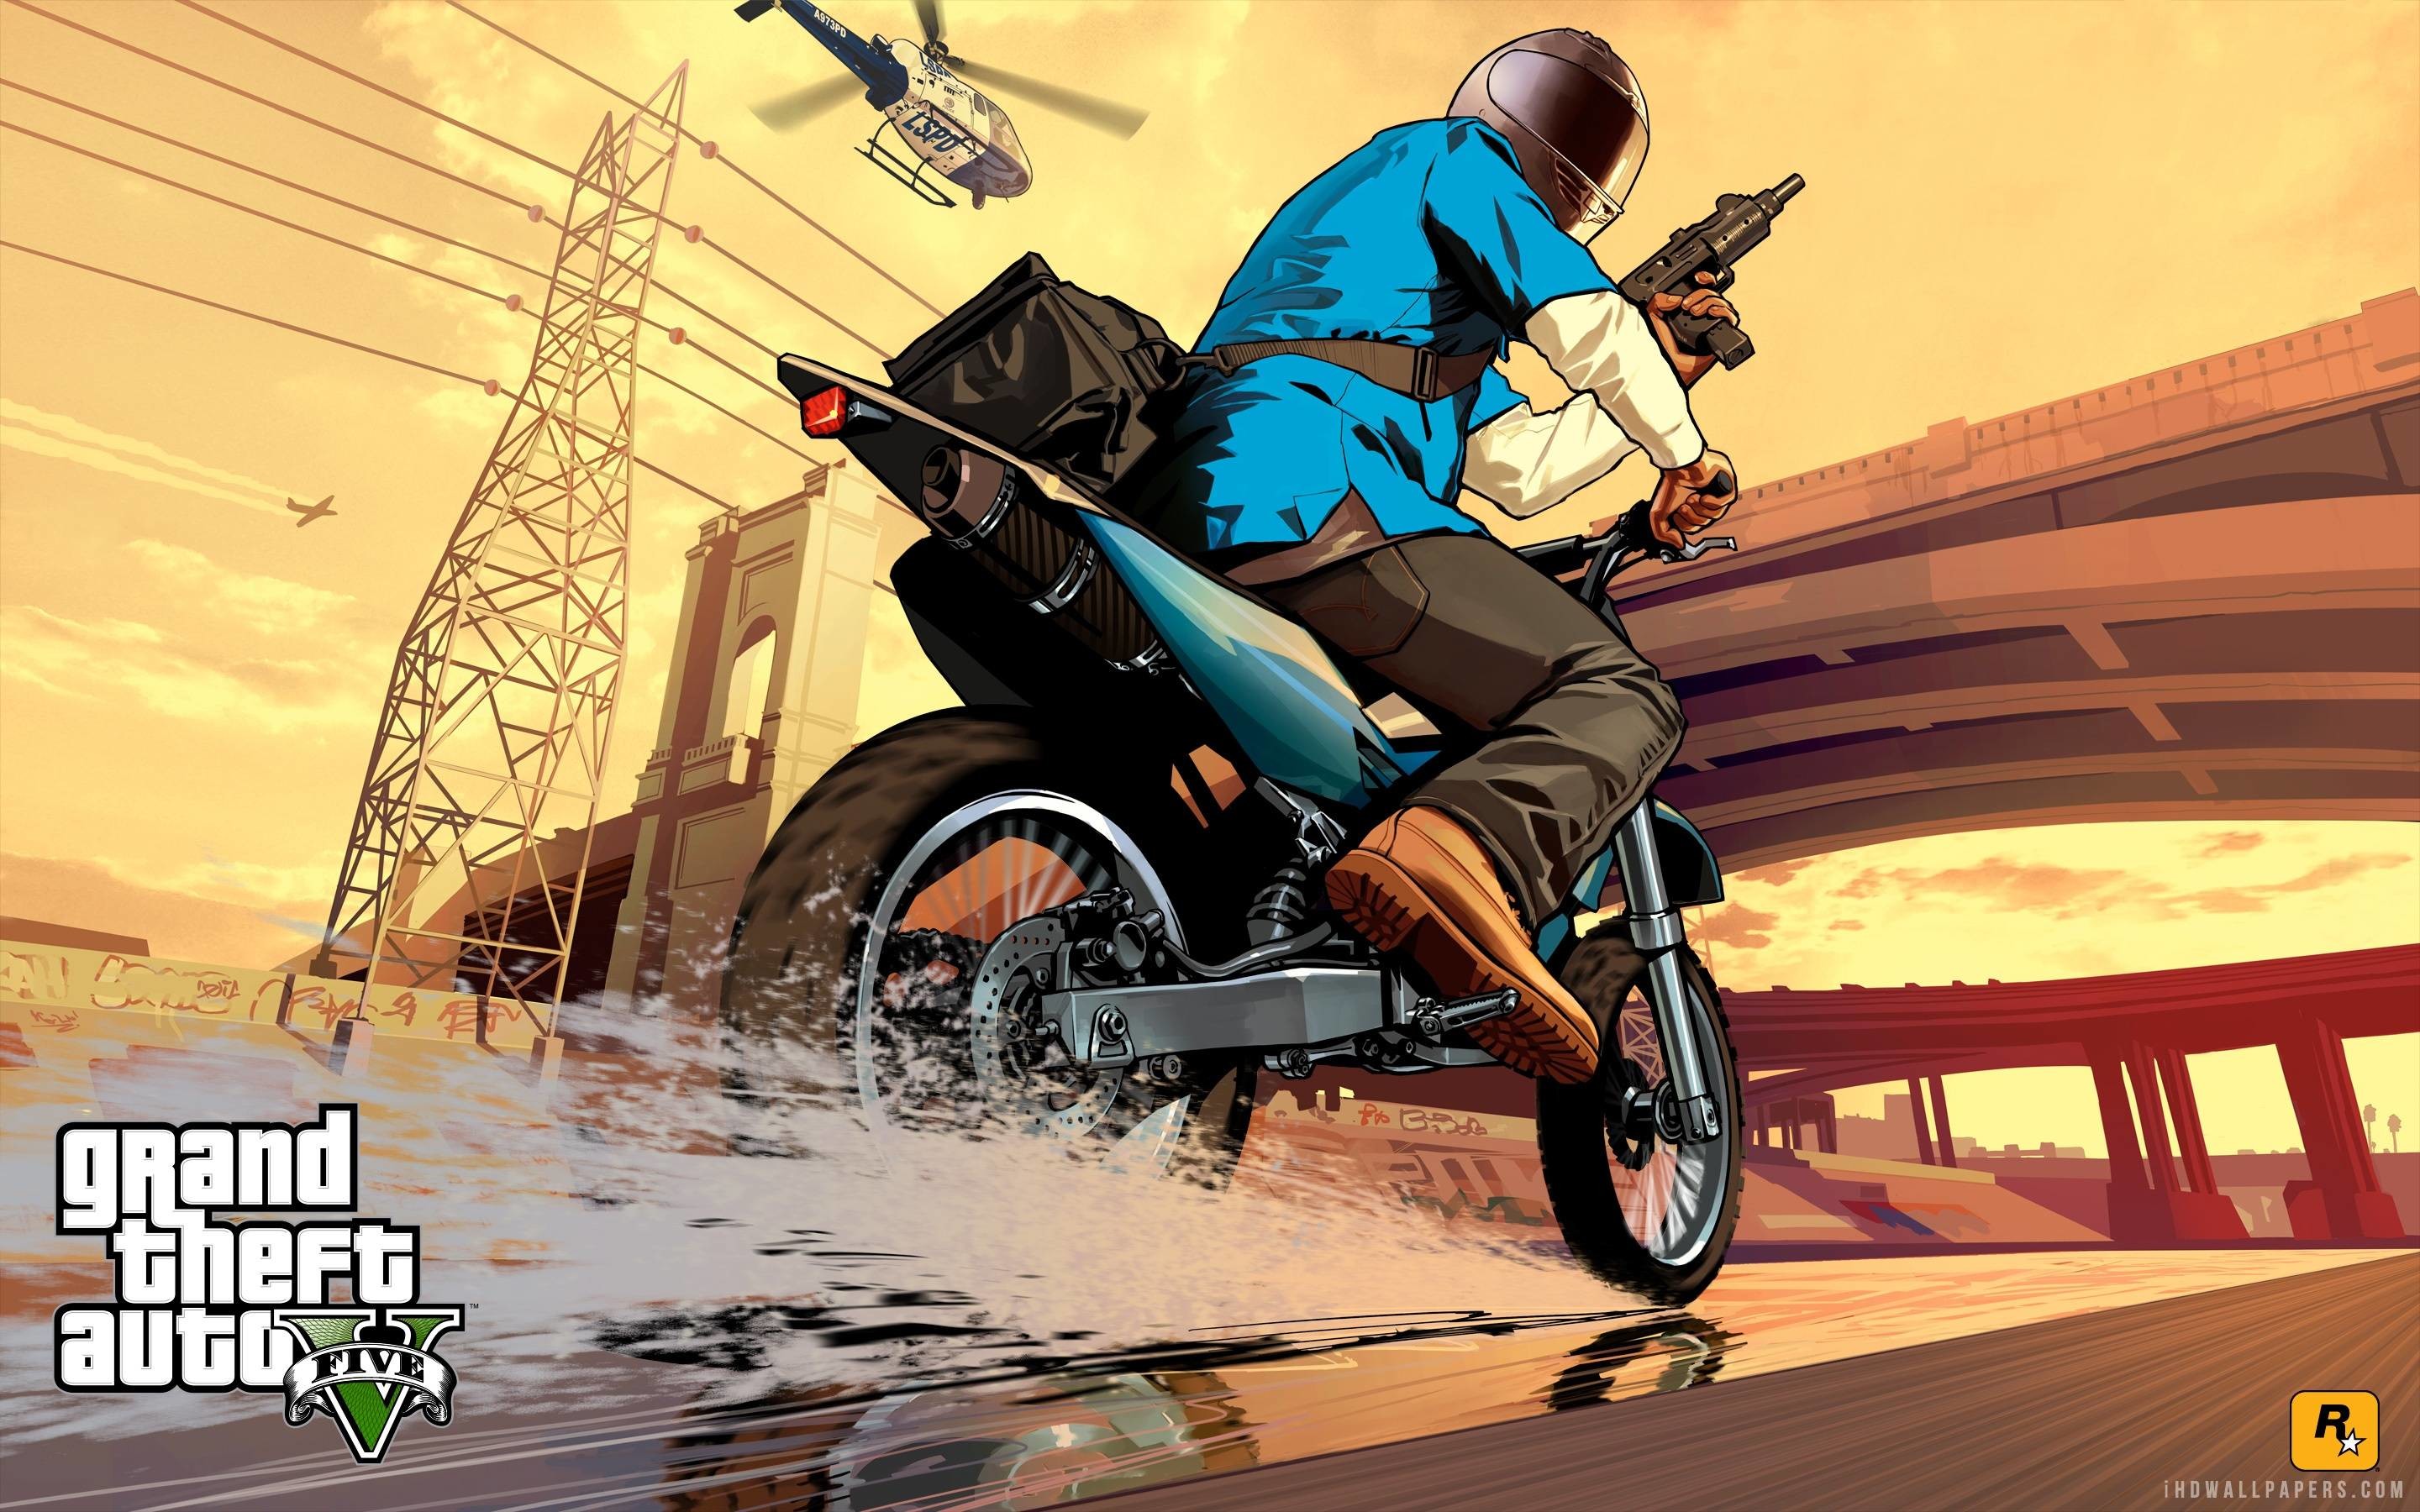 Grand Theft Auto Wallpaper 73 images